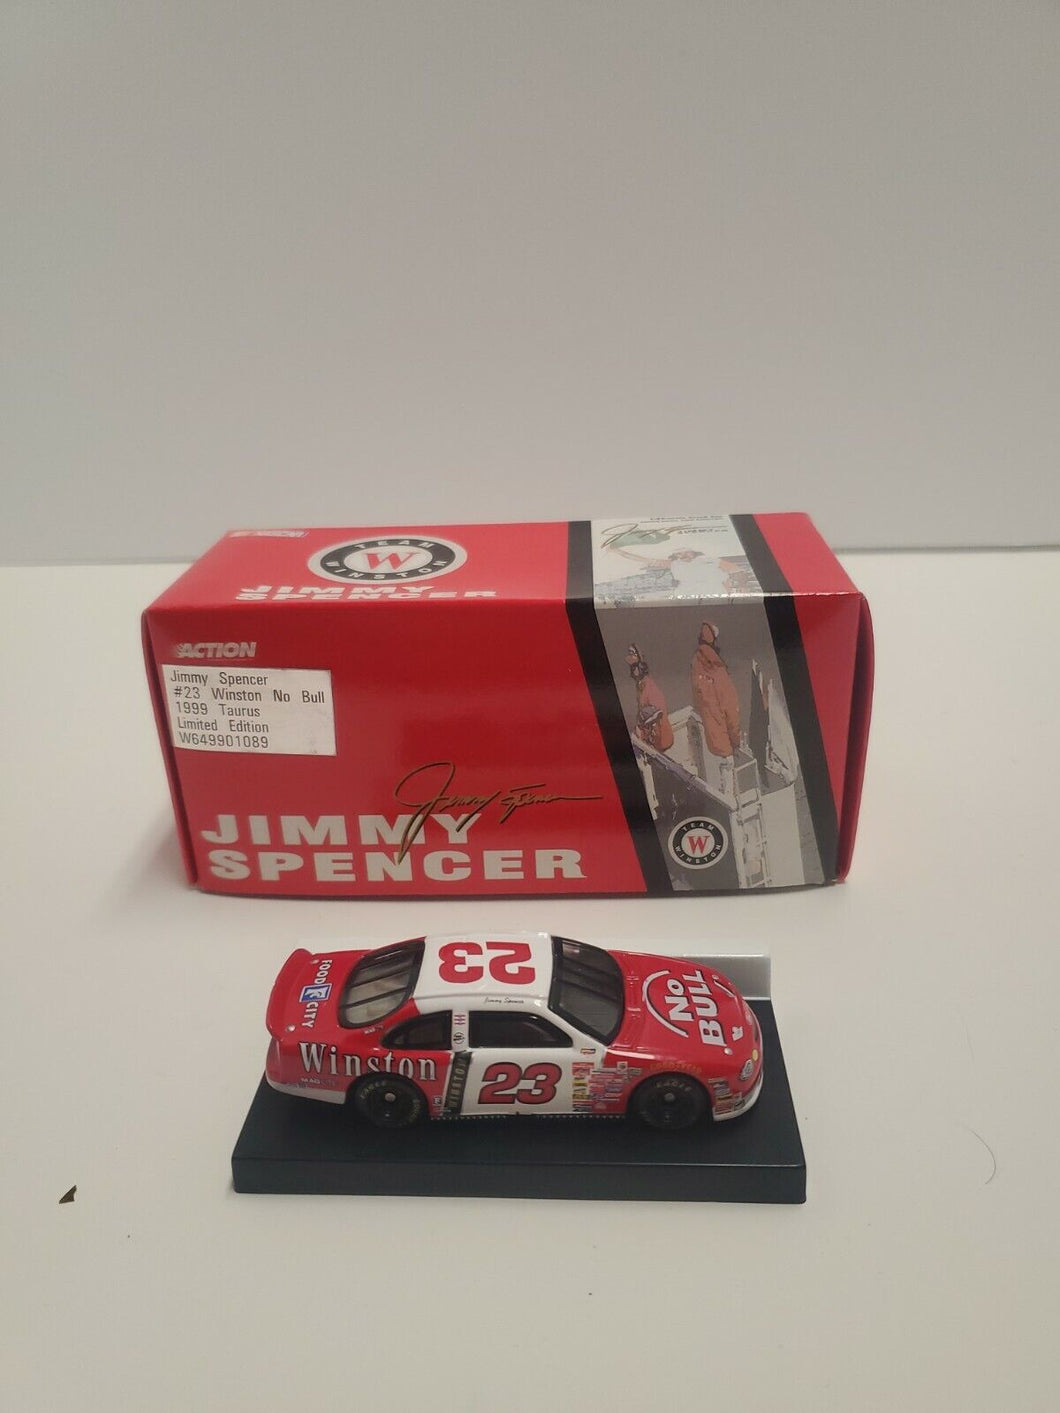 ACTION RACING COLLECTIBLES #99-01089: Jimmy Spencer 1/64 Scale #23 Winston 